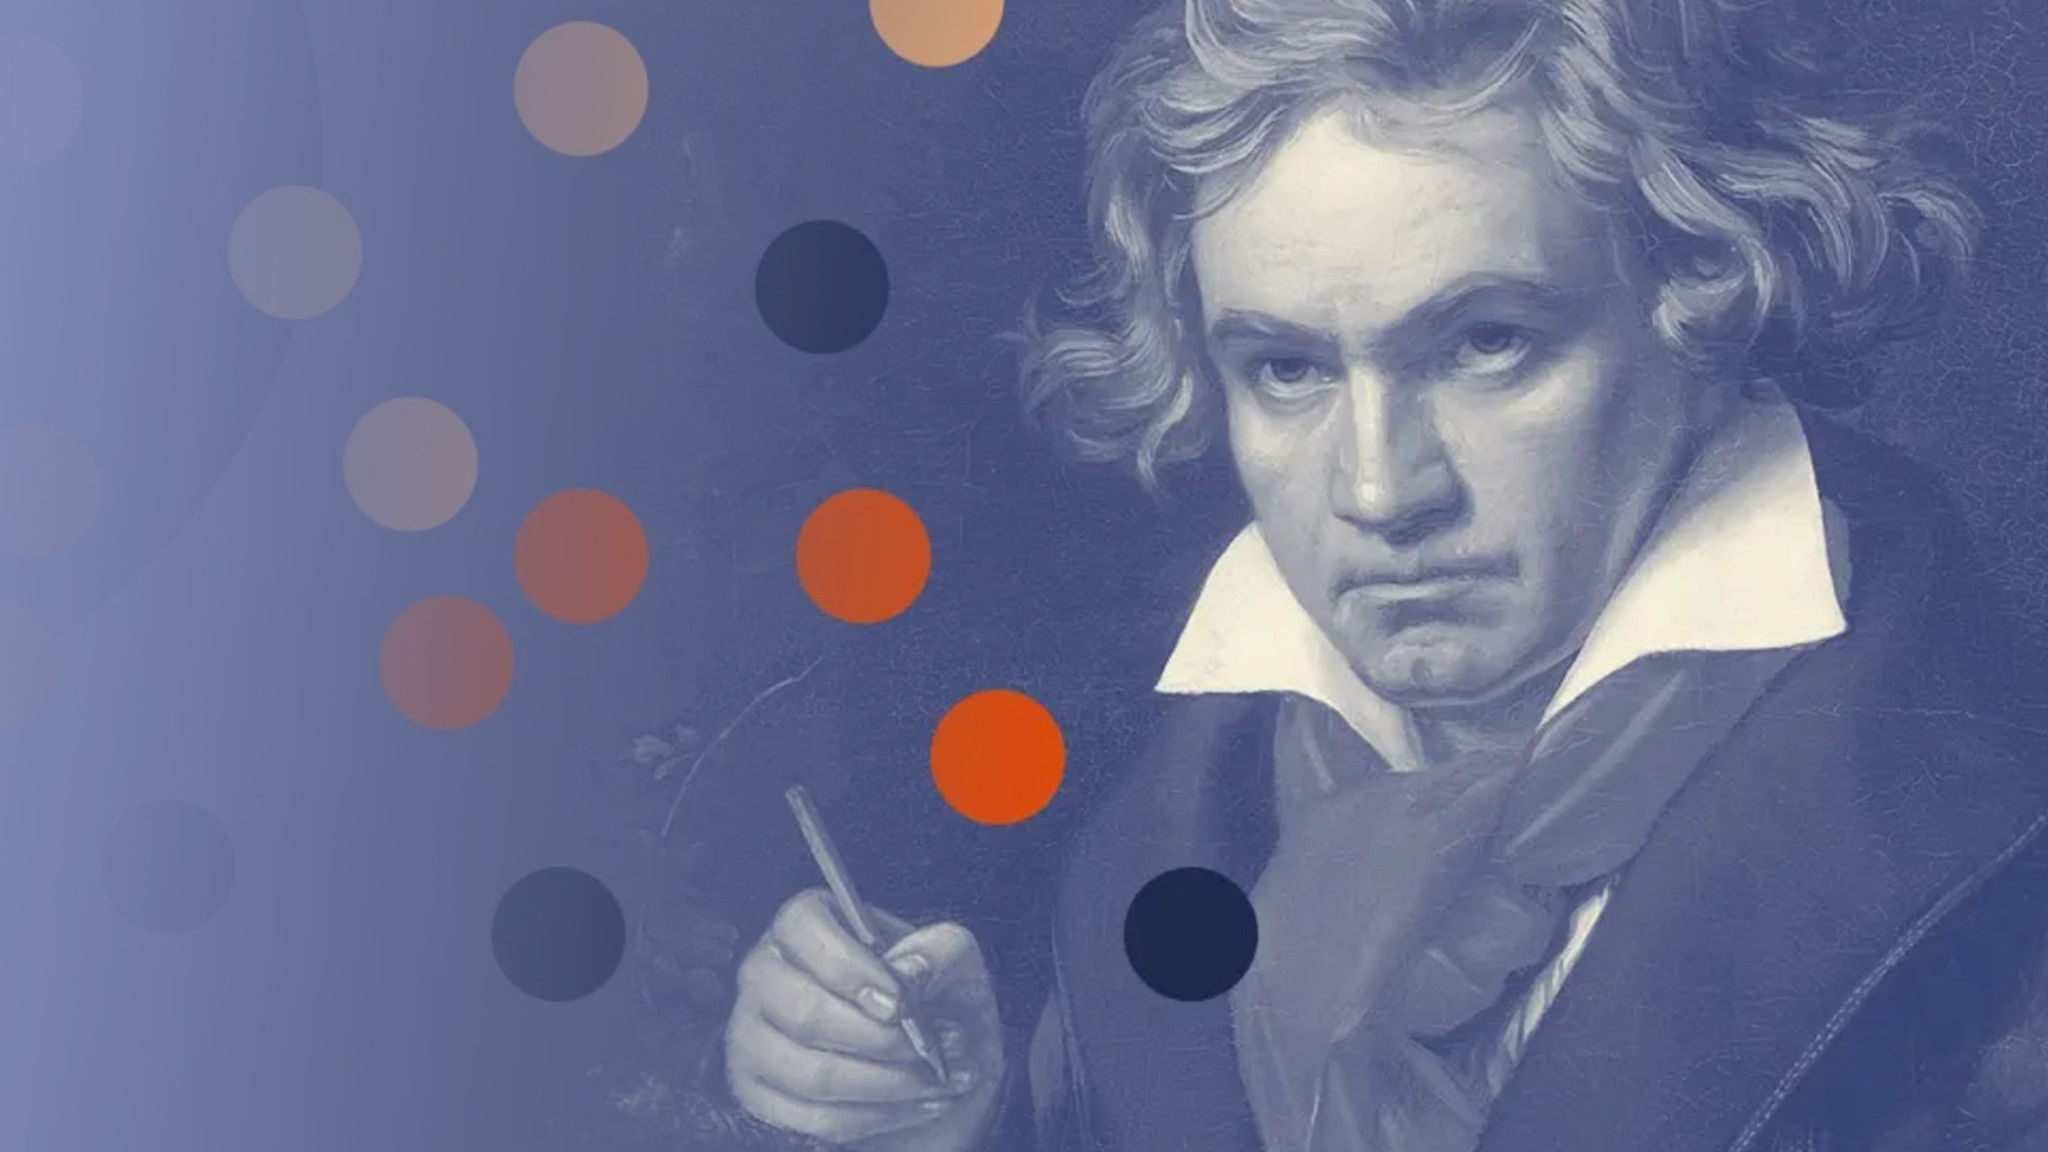 Deutsche Grammophon and Google Arts & Culture Celebrate Beethoven With a Completely New Way to Discover His Famous Piano Sonatas.